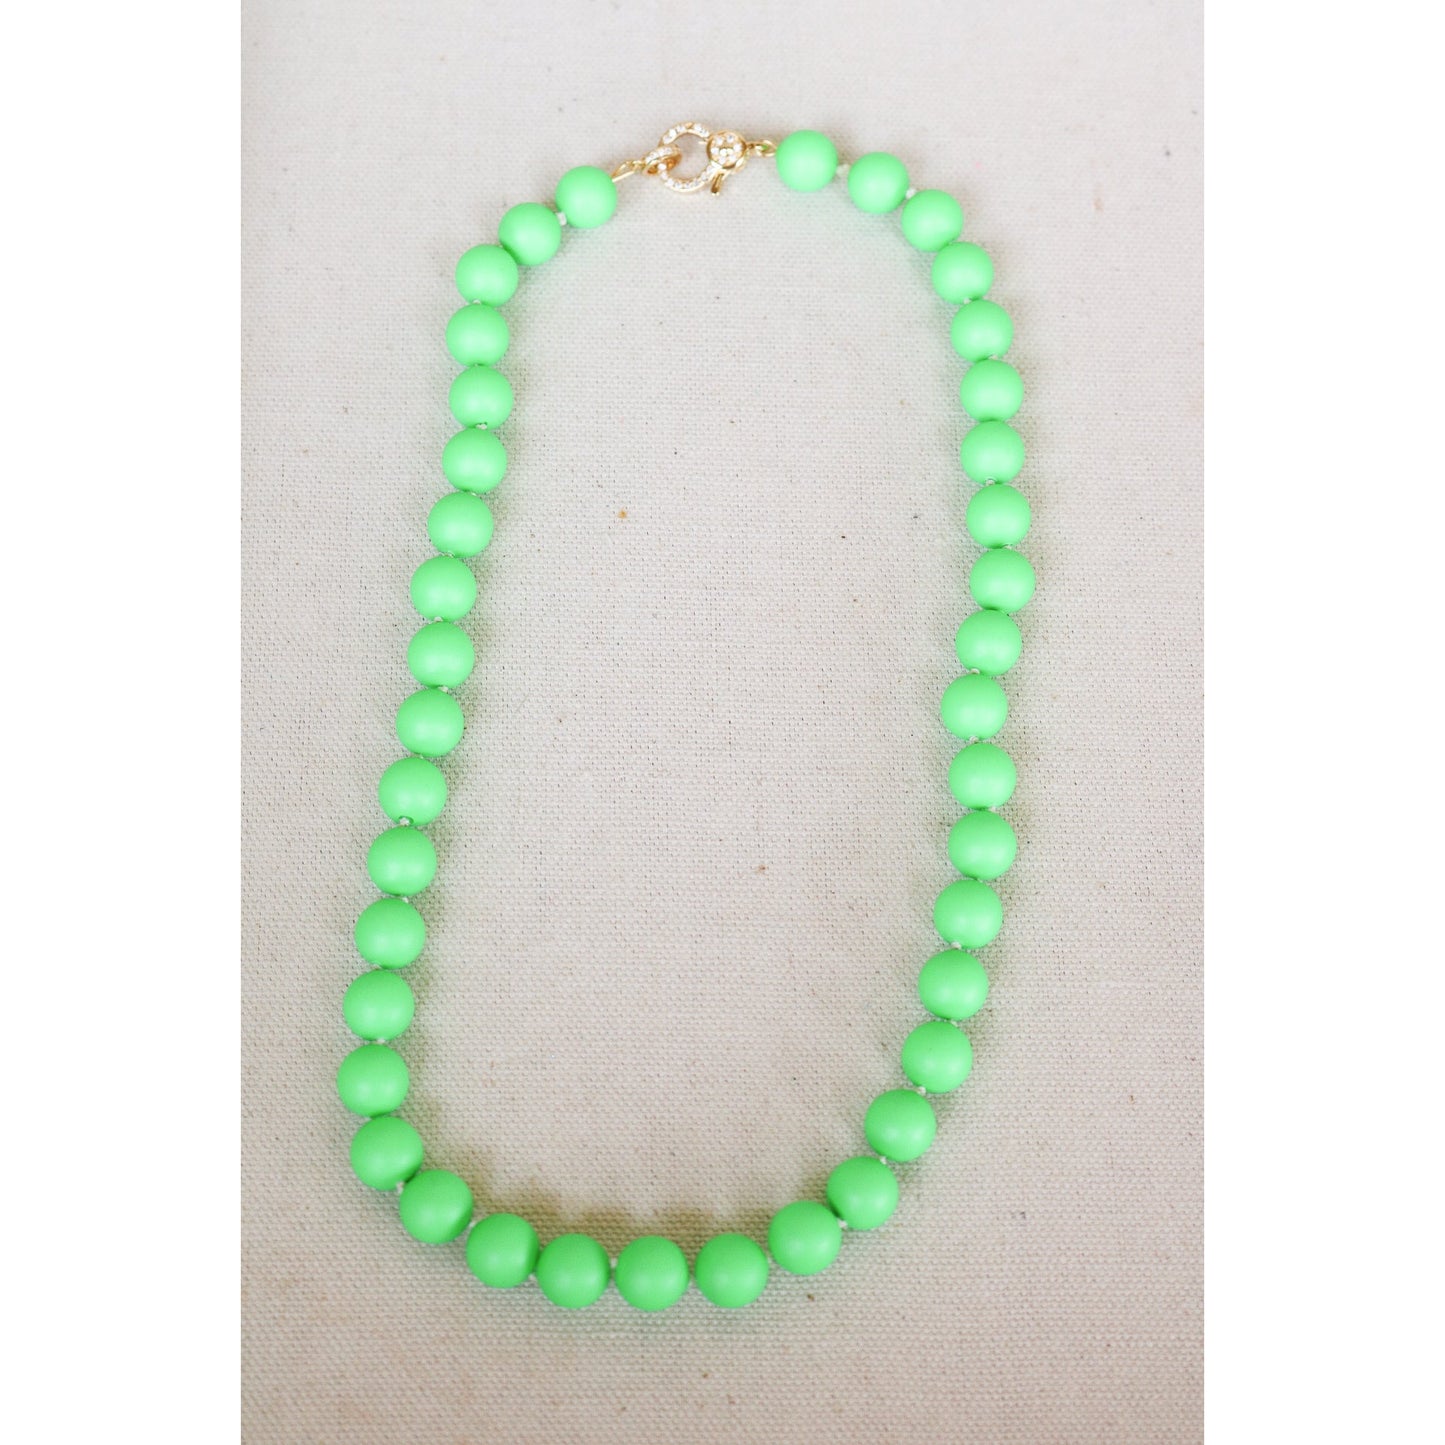 Neon Swarovski Pearl Hand Knotted Necklace